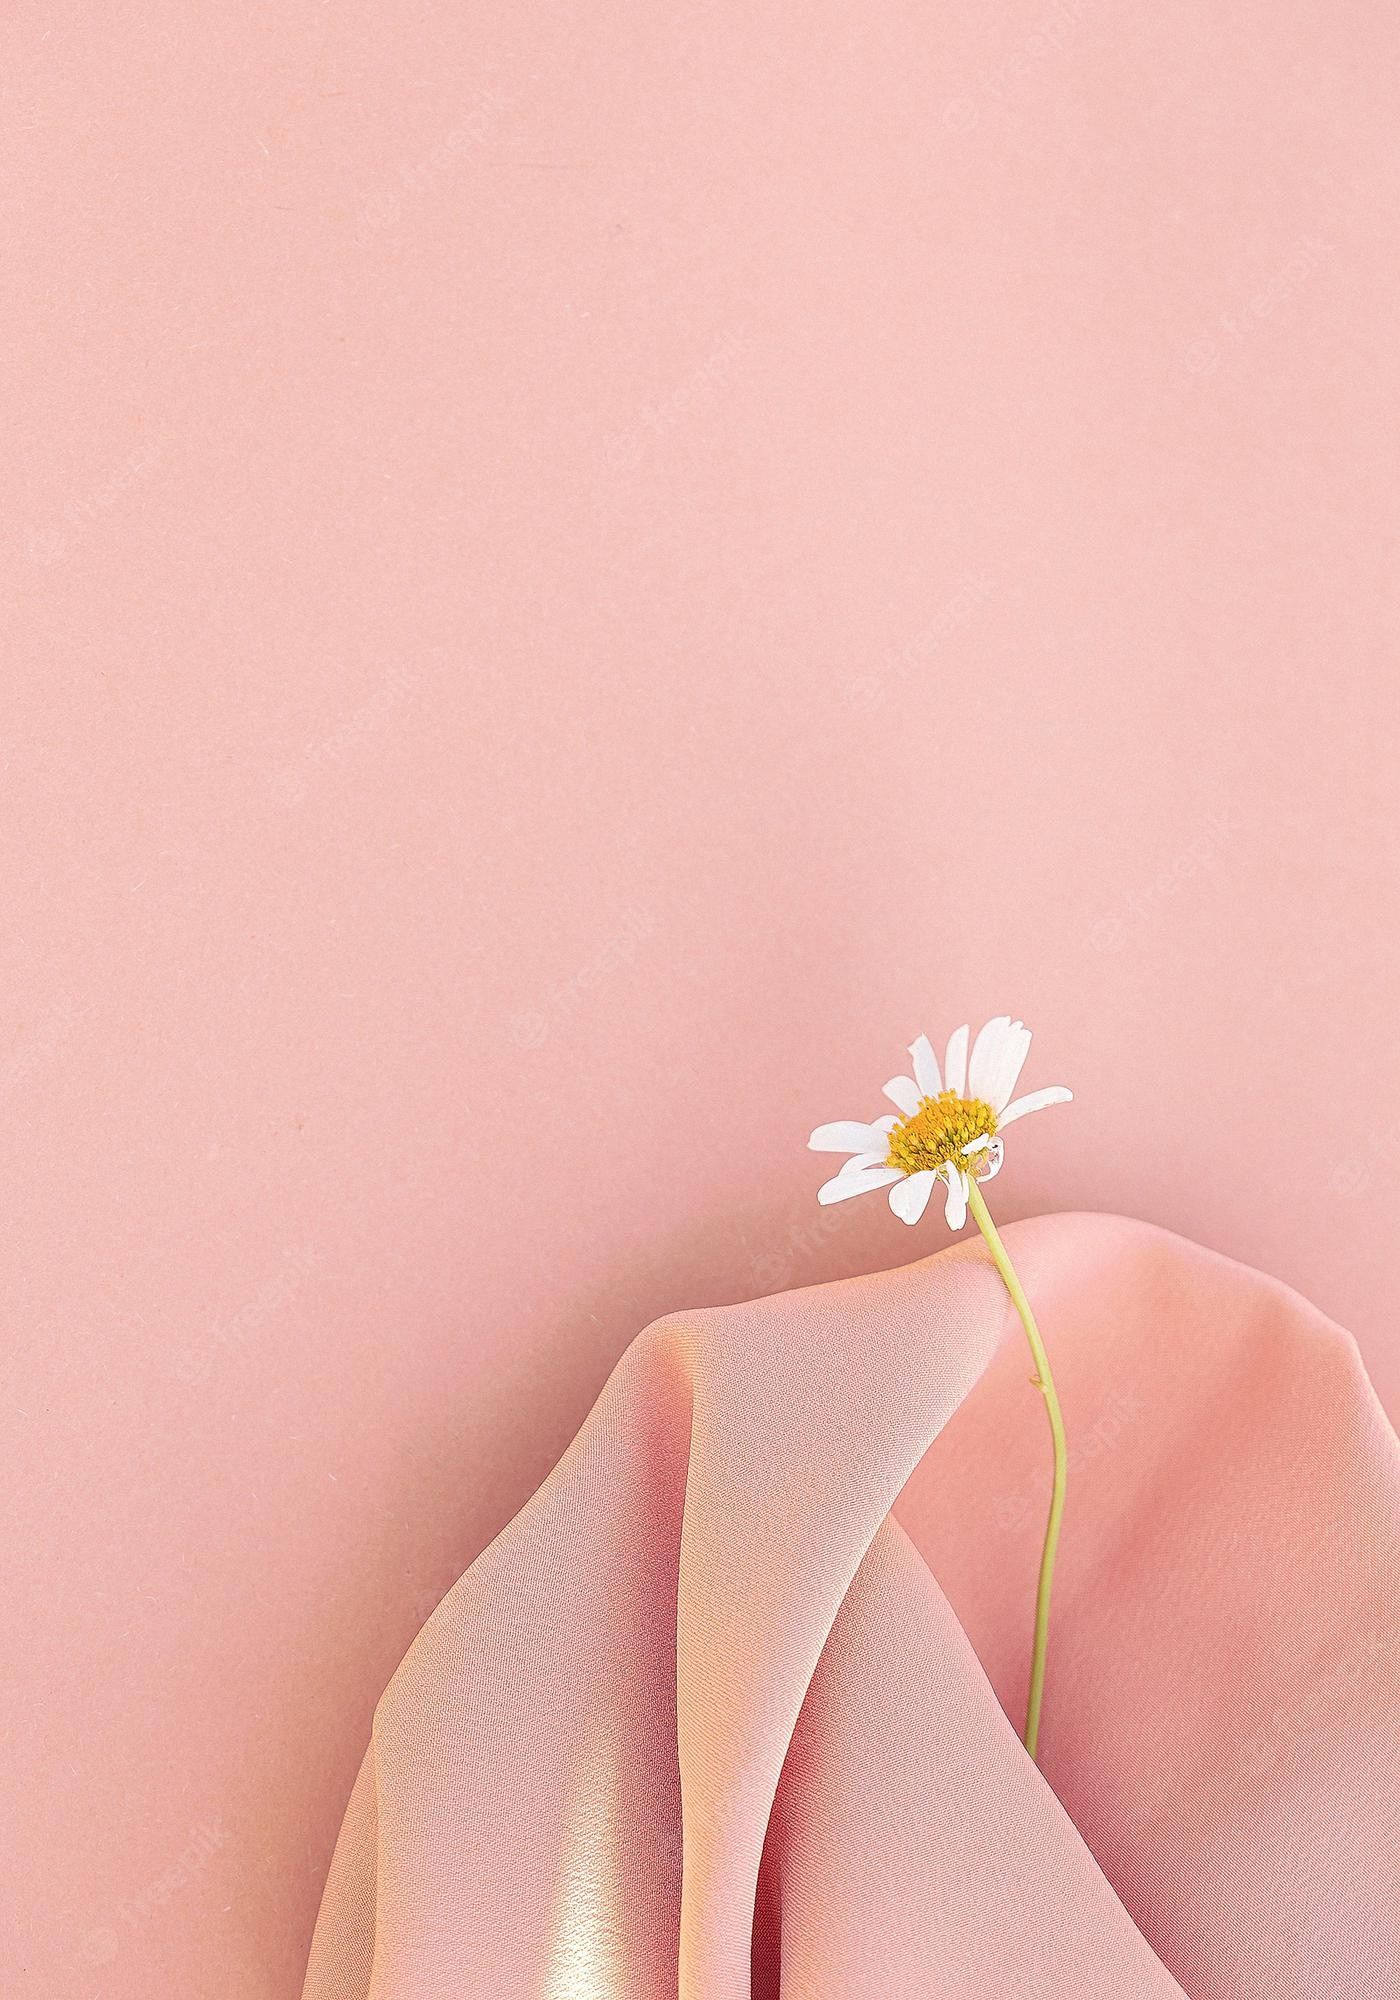 A single flower is on top of some fabric - Soft pink